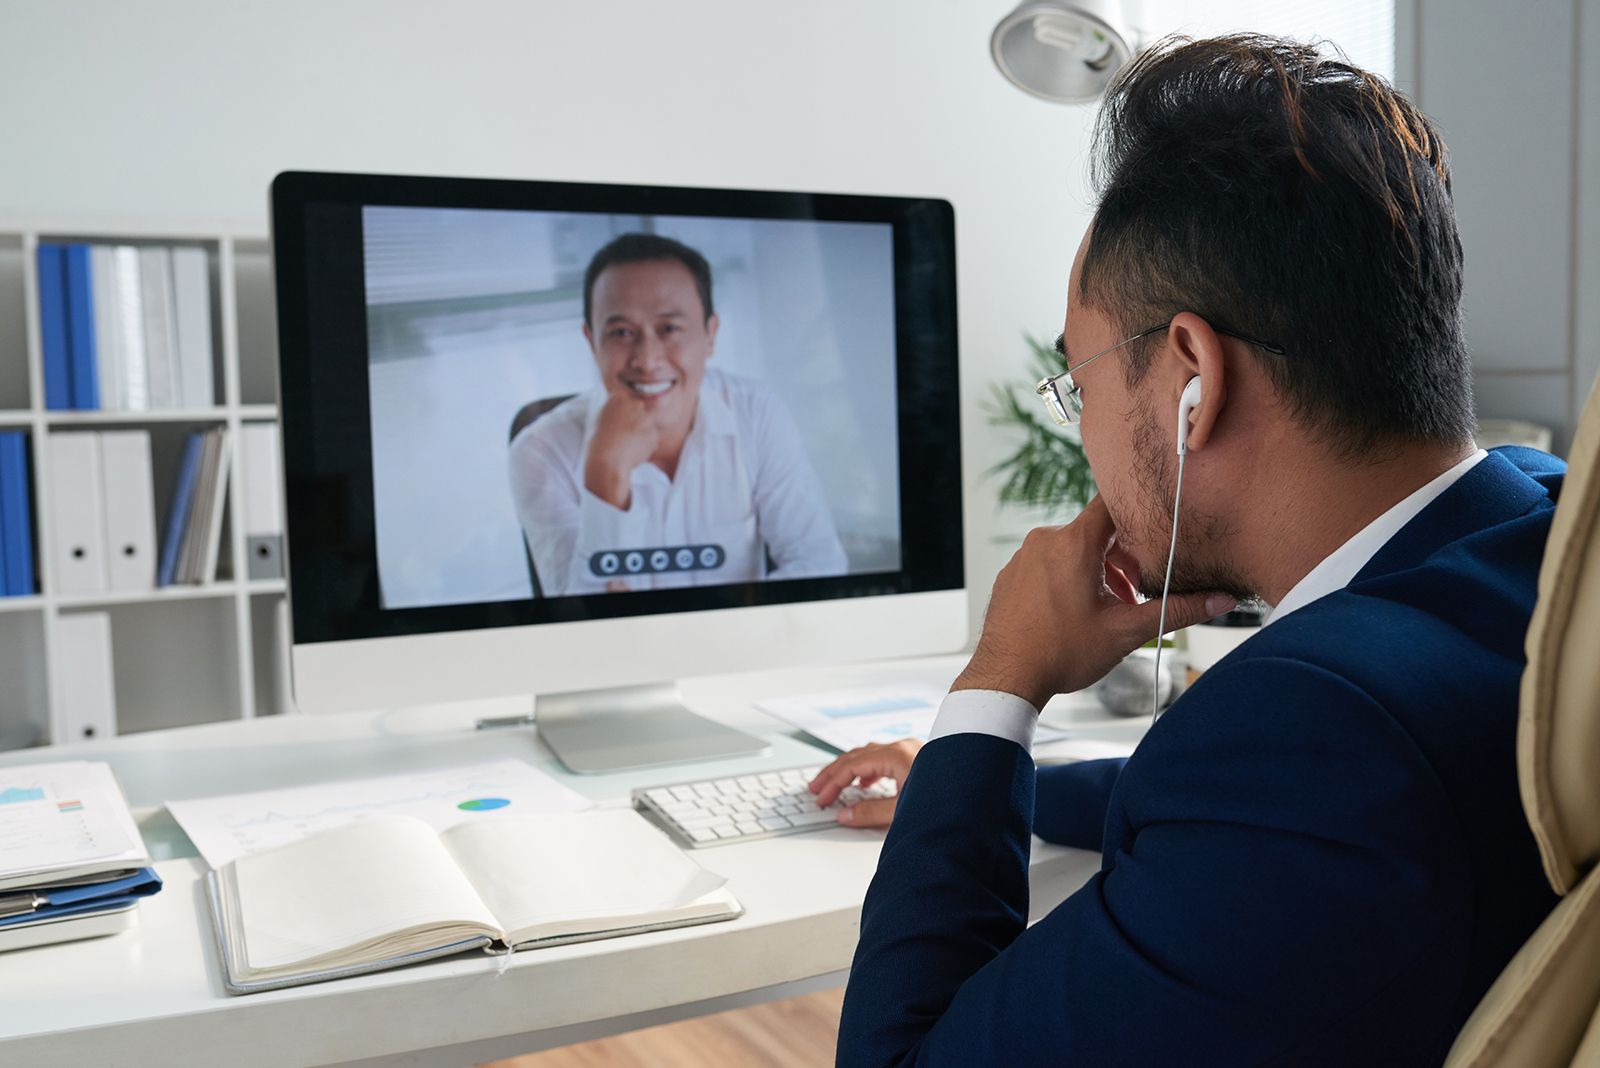 How to Engage Remote Meeting Participants